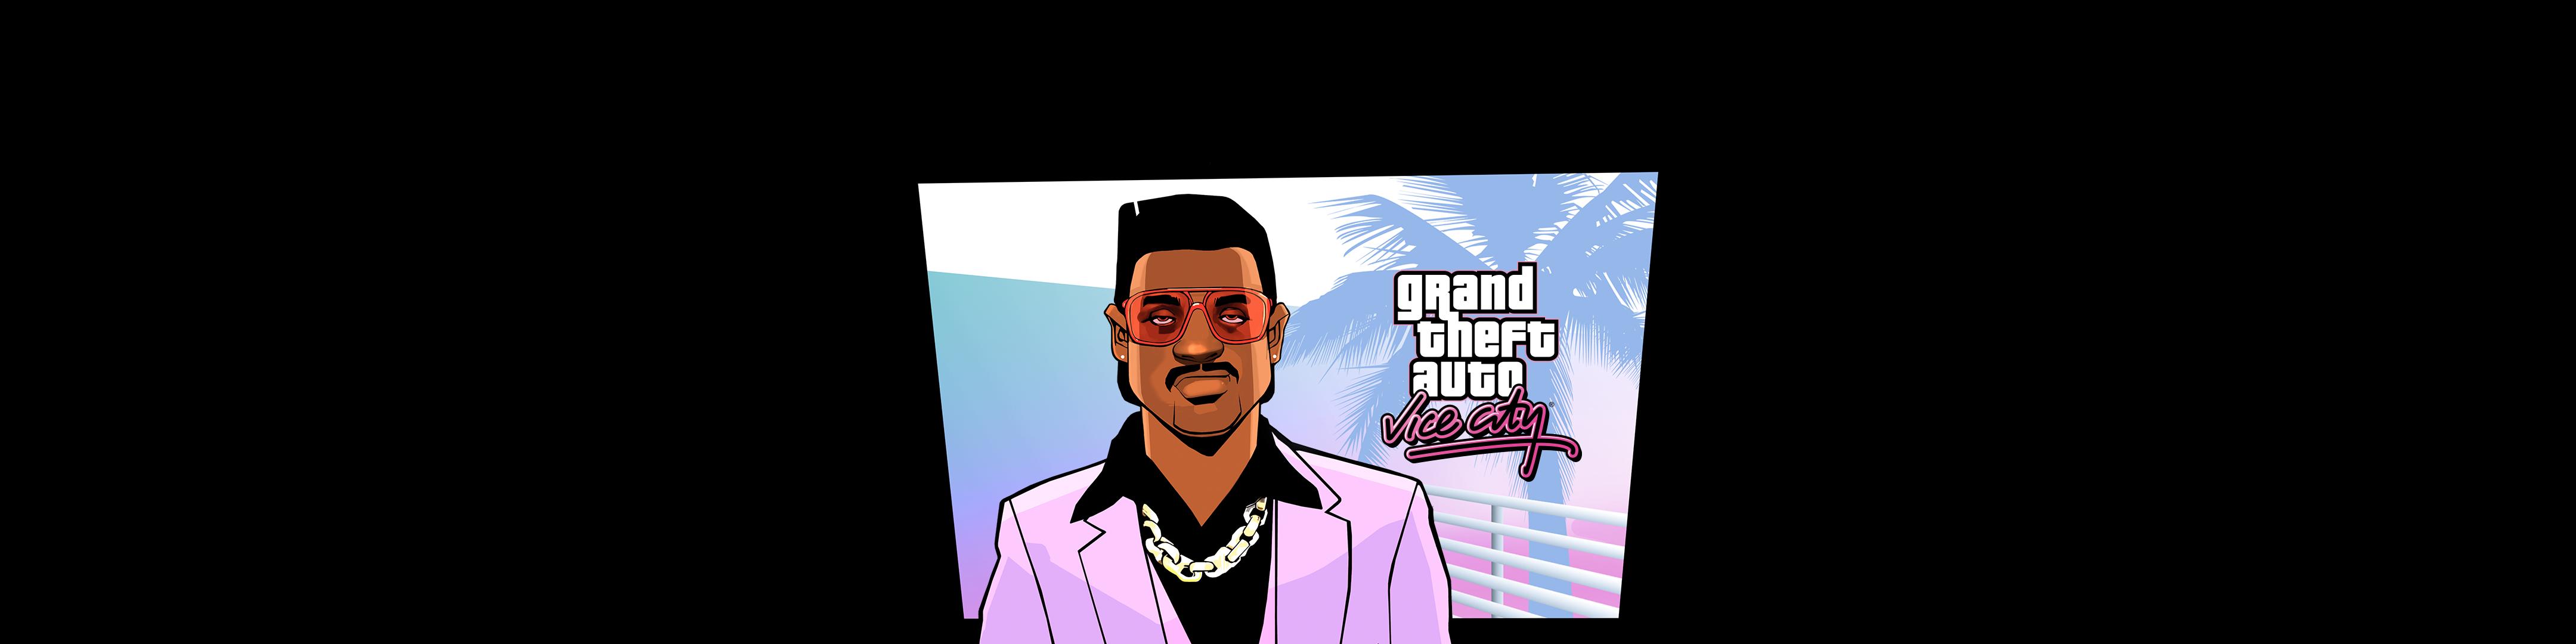 Grand Theft Auto Vice City Overview Apple App Store Us - roblox gta vice city games